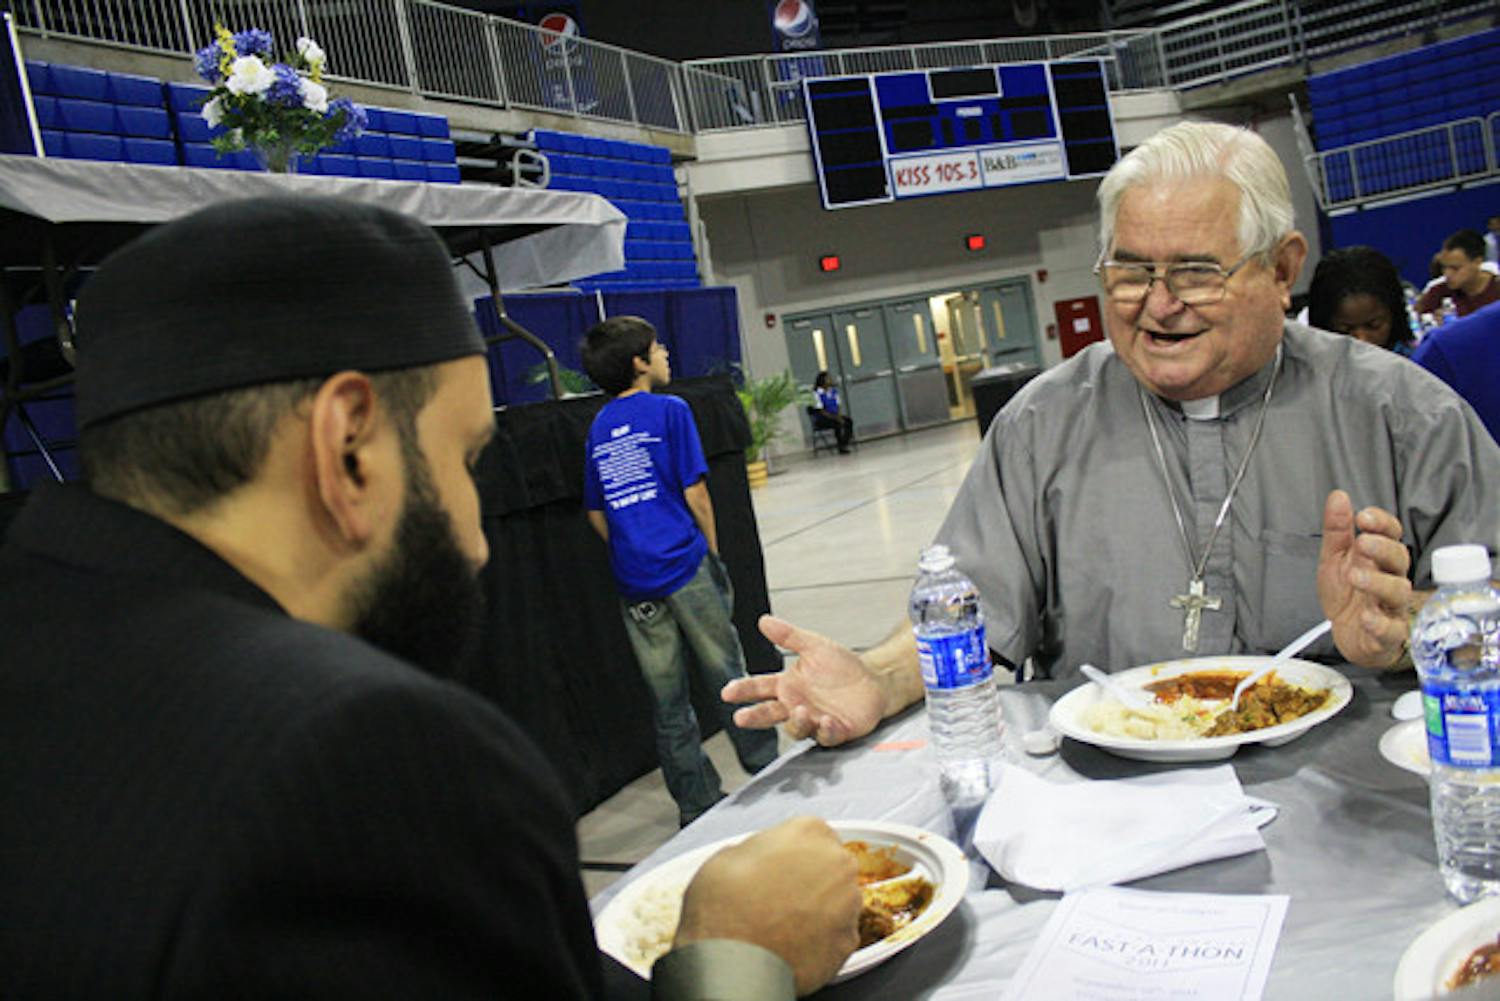 Imam Omar Suleiman and Father Les Singleton discuss differences in faith over dinner at Islam on Campus' Fast-A-Thon. "To say you're an atheist is to deny a part of yourself," Singleton said as he described "Mere Christianity," a book by C. S. Lewis, to Suleiman.